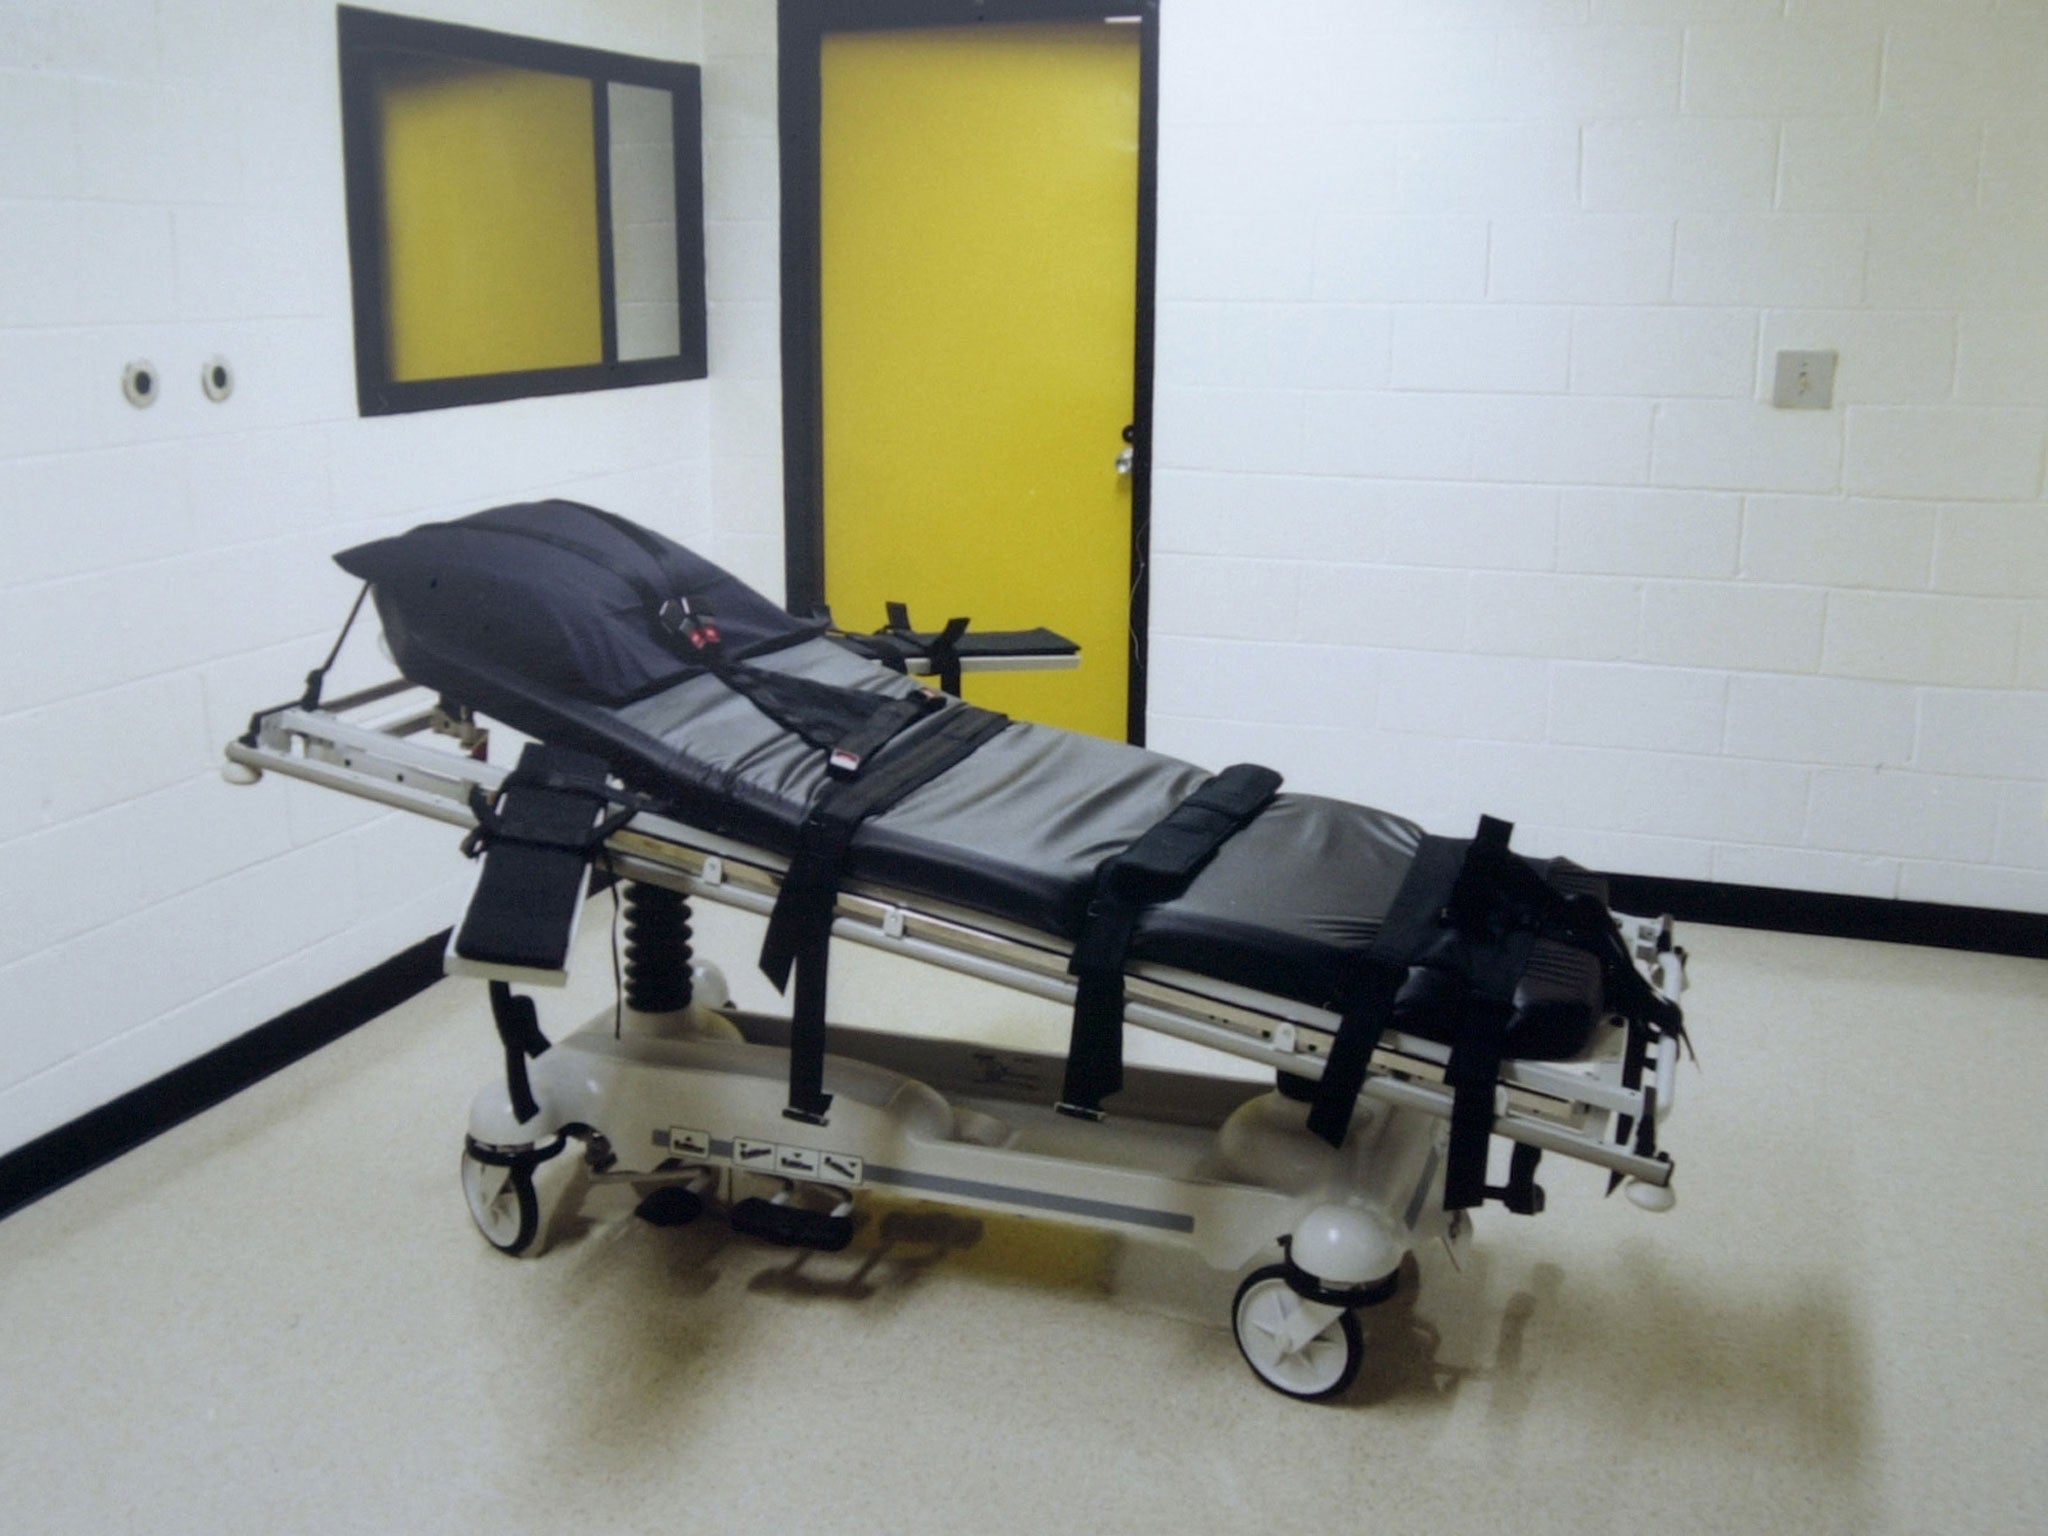 A death chamber at a US prison